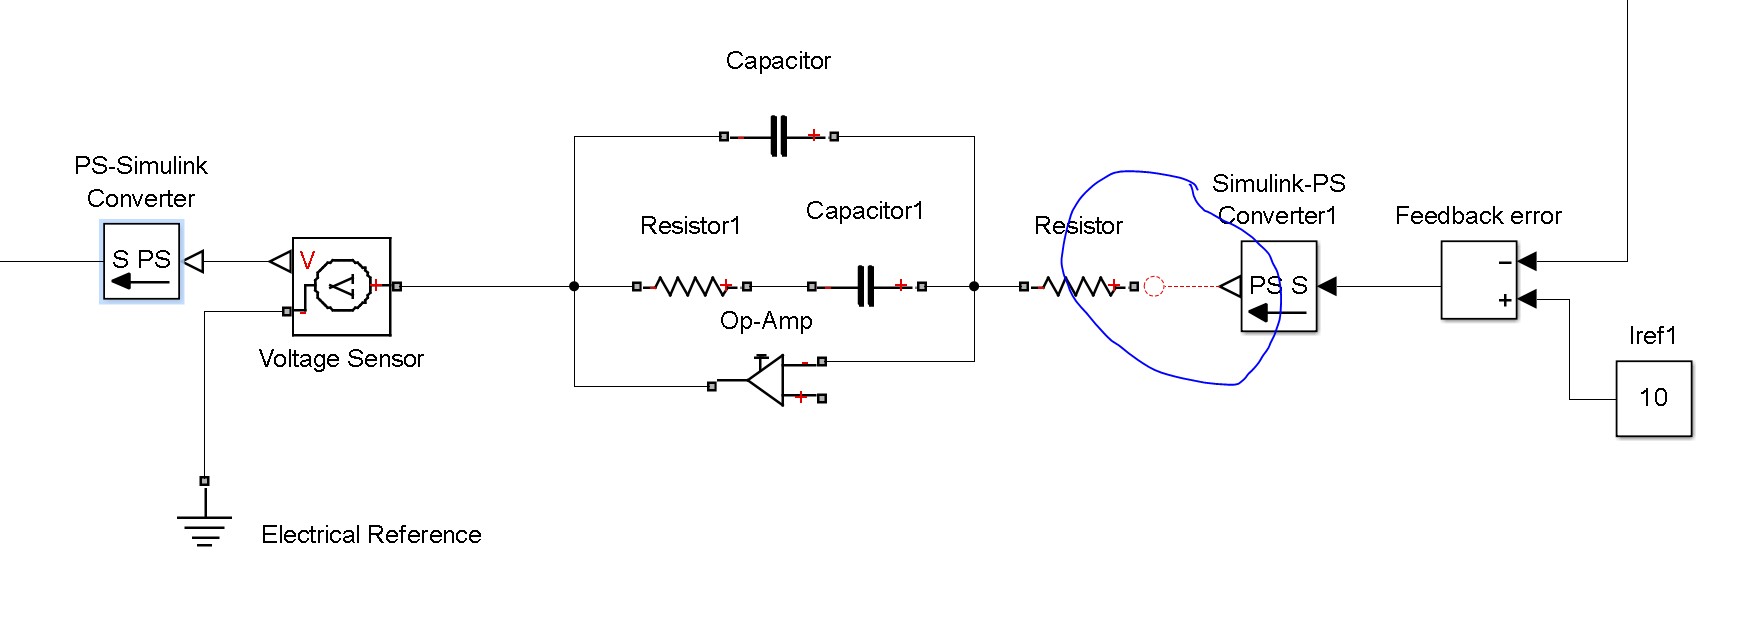 I did use the S PS and PS S converters but still not able to connect the output of PS S to input of Opamp circuit Please see attached snapshot